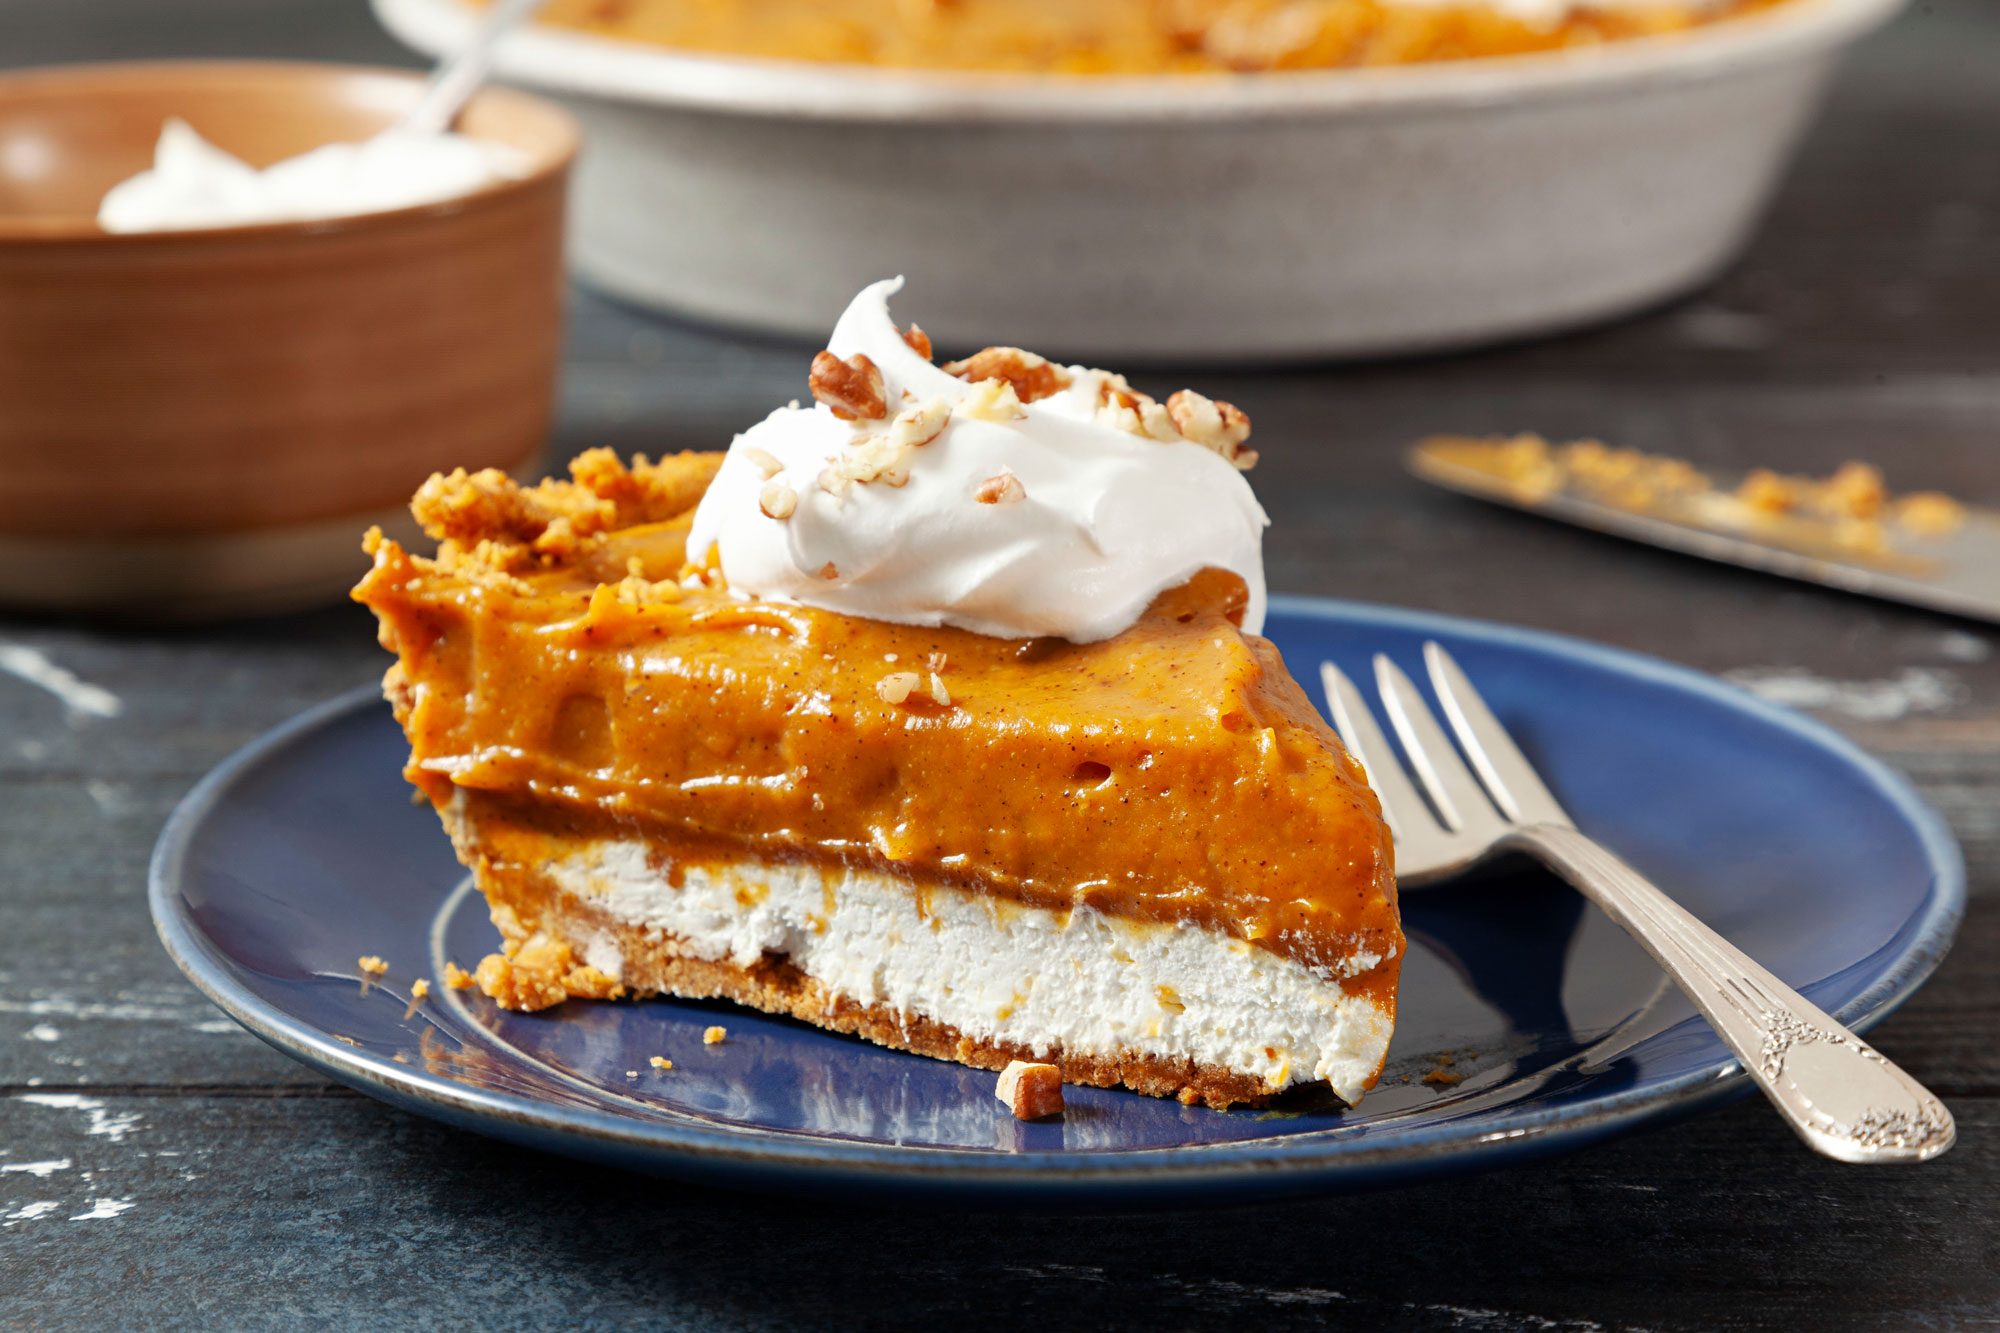 A slice of Pumpkin Chiffon Pie on a plate with a fork